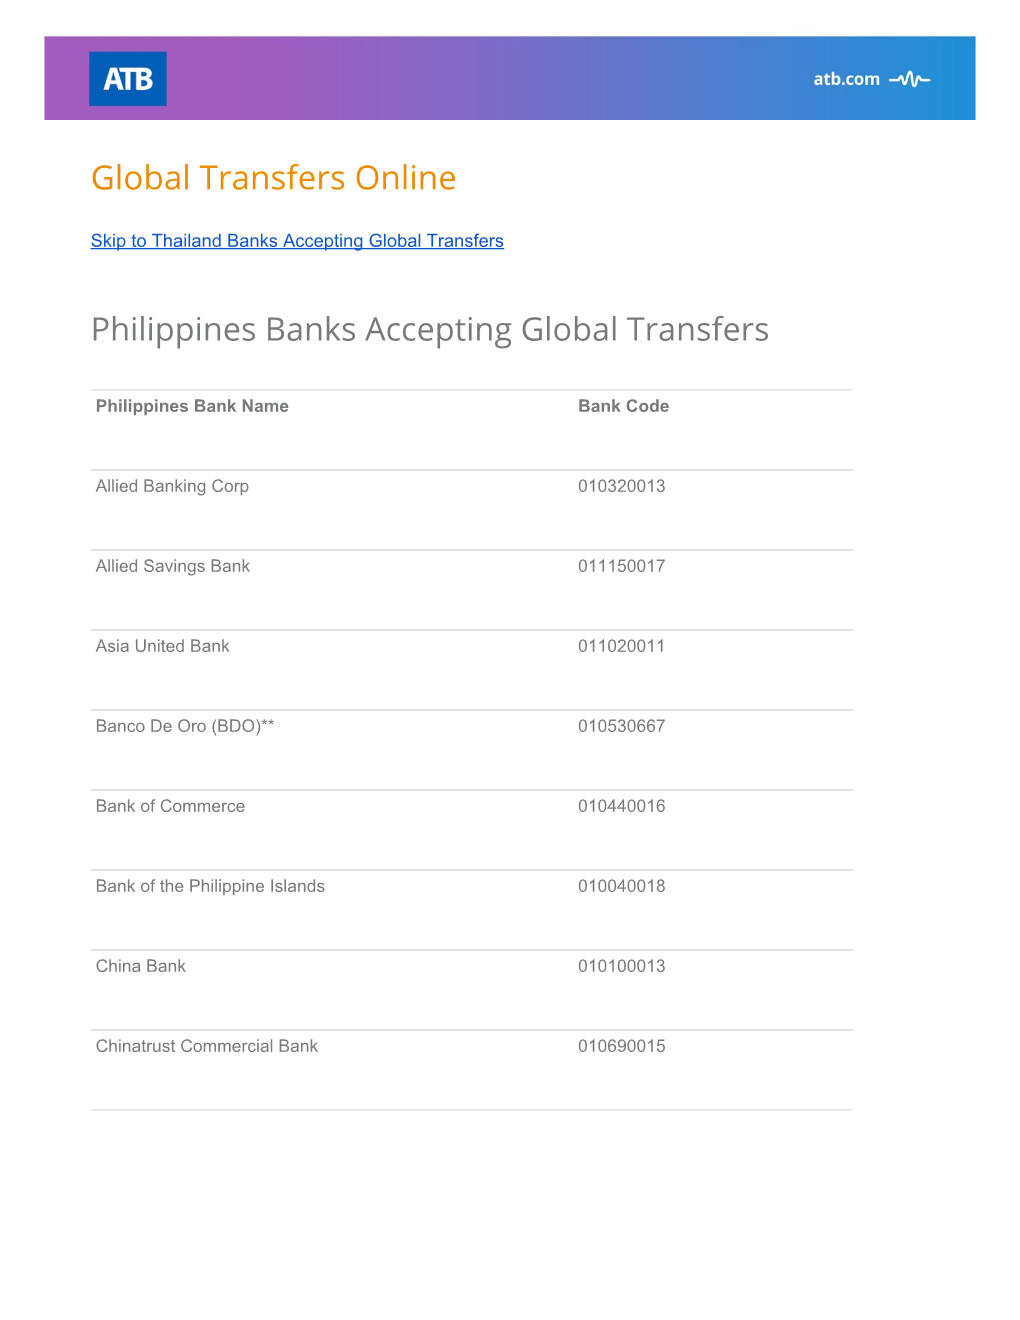 Global Transfers Online Philippines Banks Accepting Global Transfers